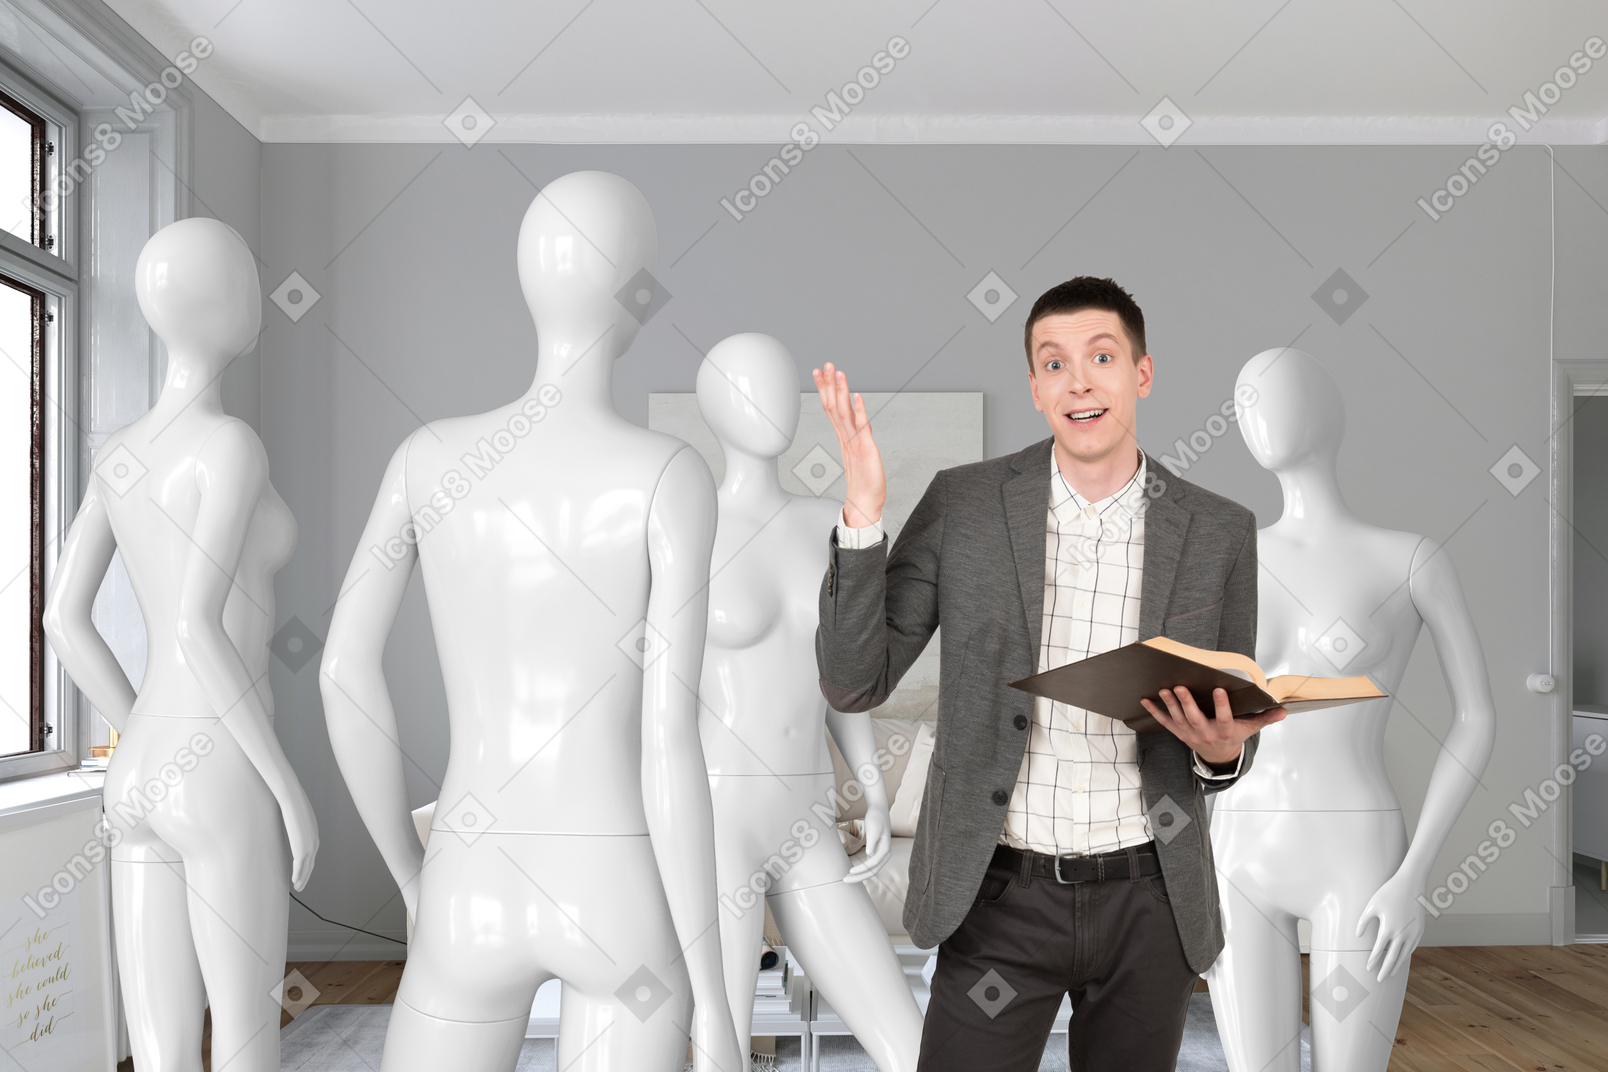 A man standing in front of a group of mannequins